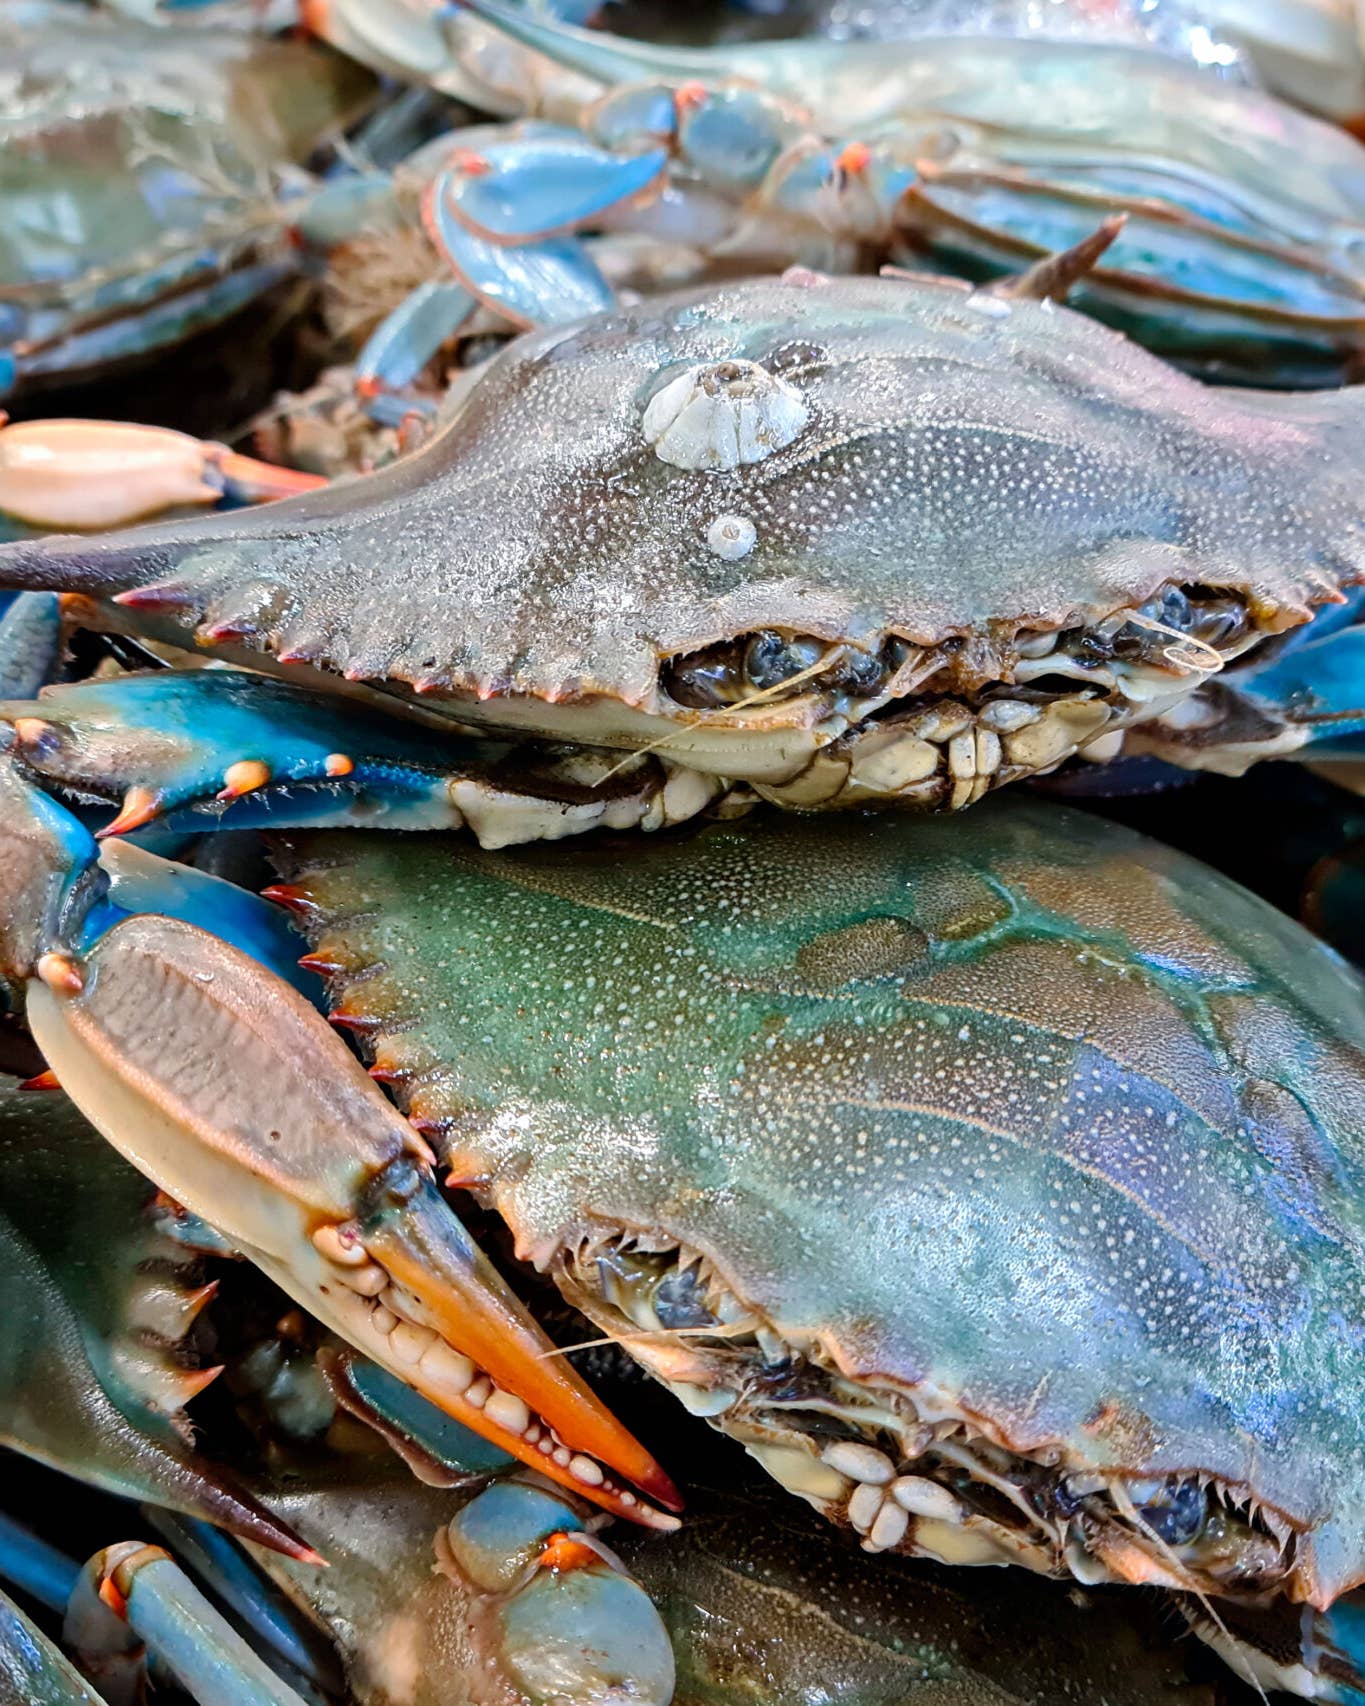 How to Eat a Blue Crab